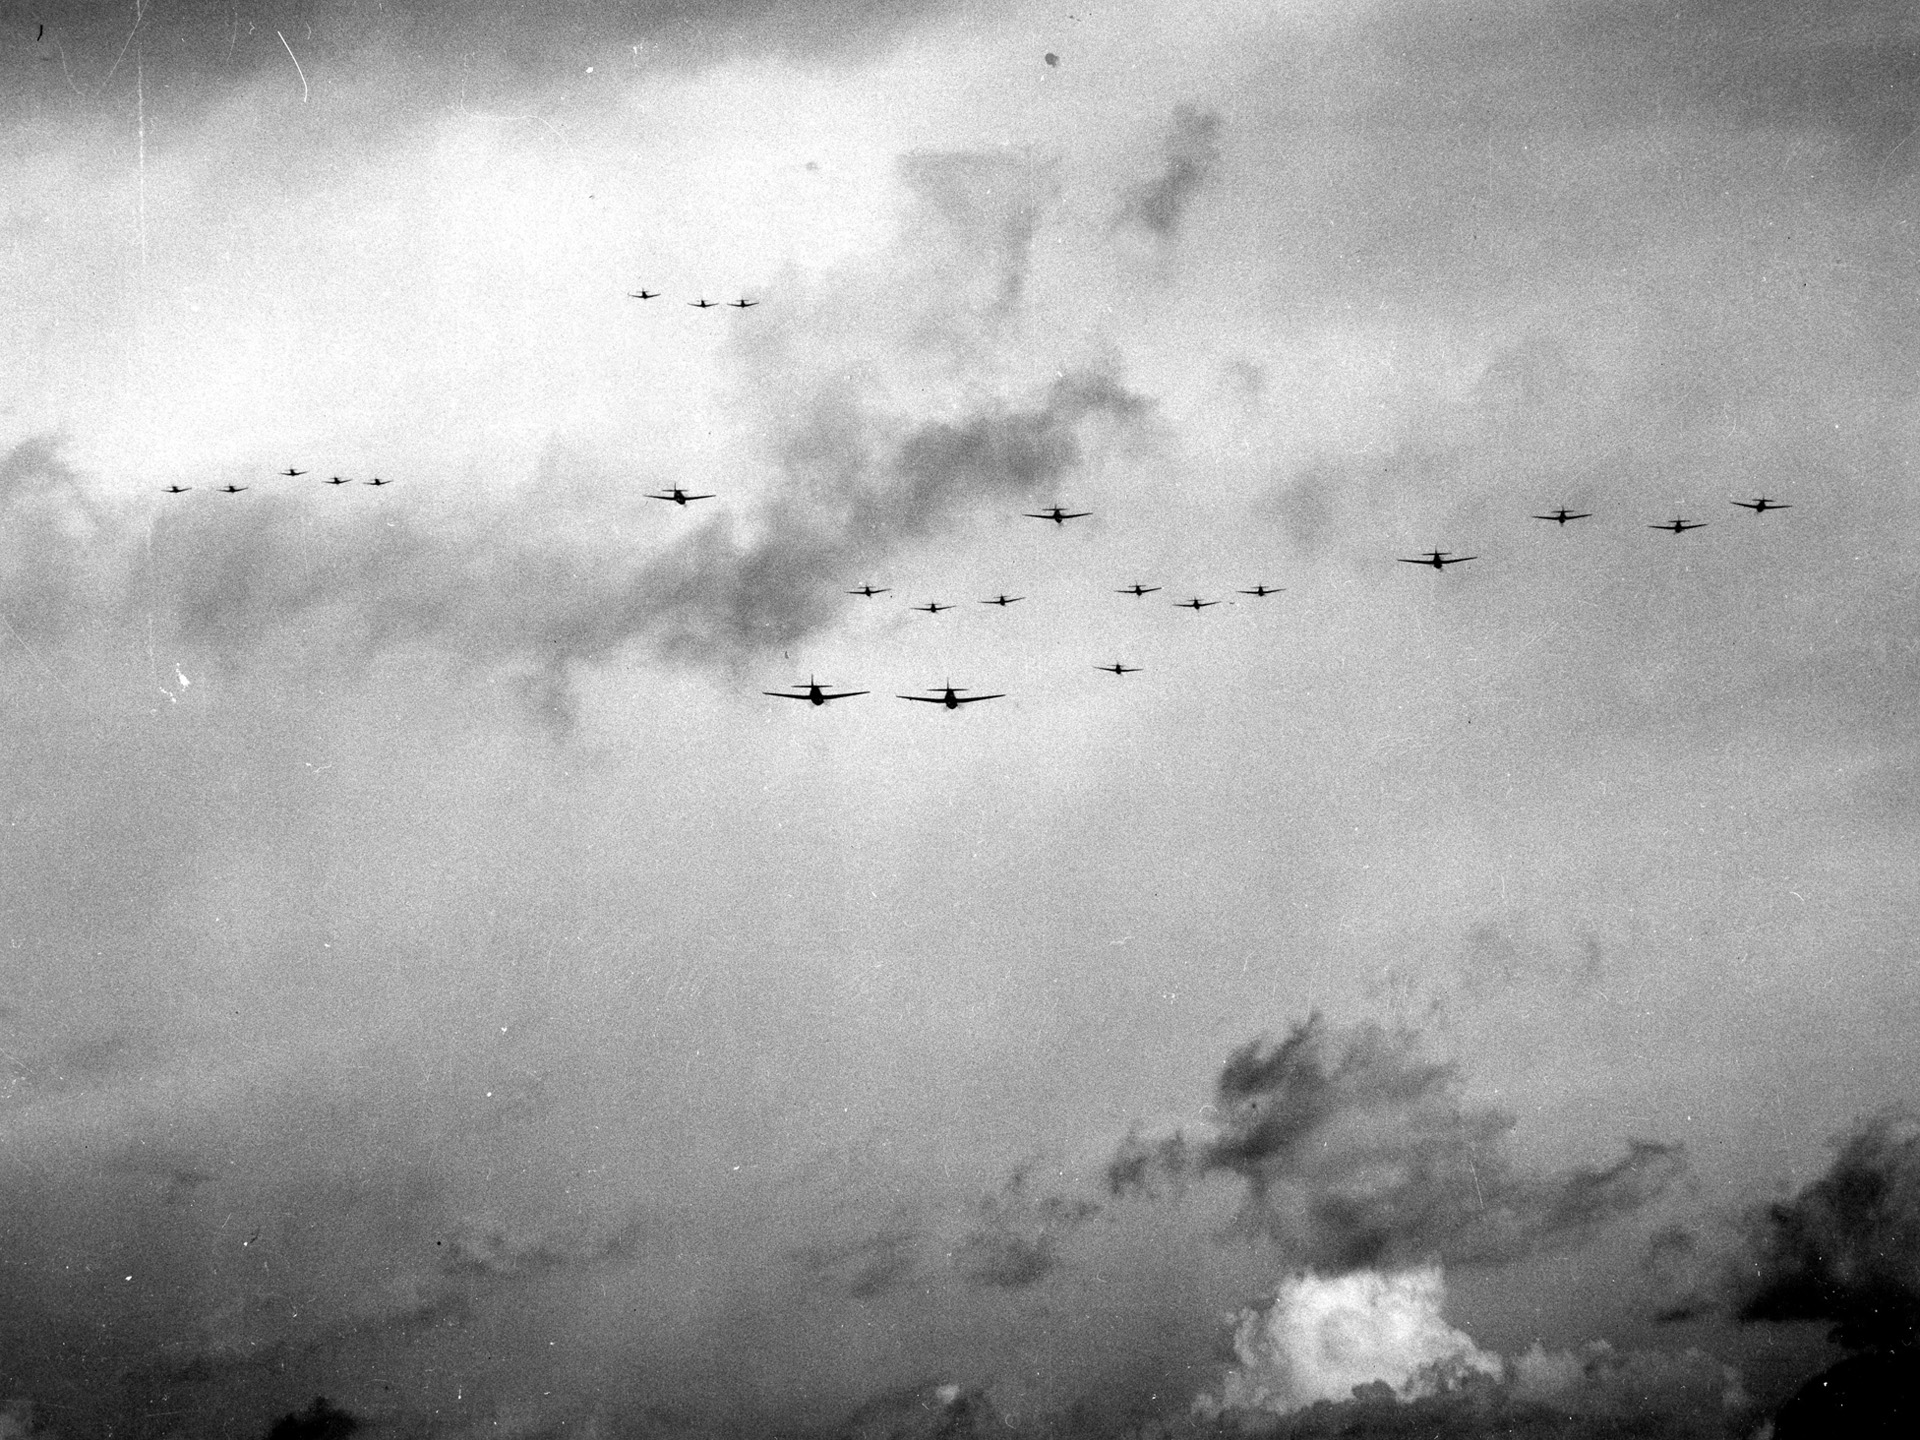 Navy planes from Task Force 58 hunt for Japanese aircraft. In the two-day pitched battle, the Japanese lost three carriers and two oilers sunk and had almost all of their aircraft destroyed.